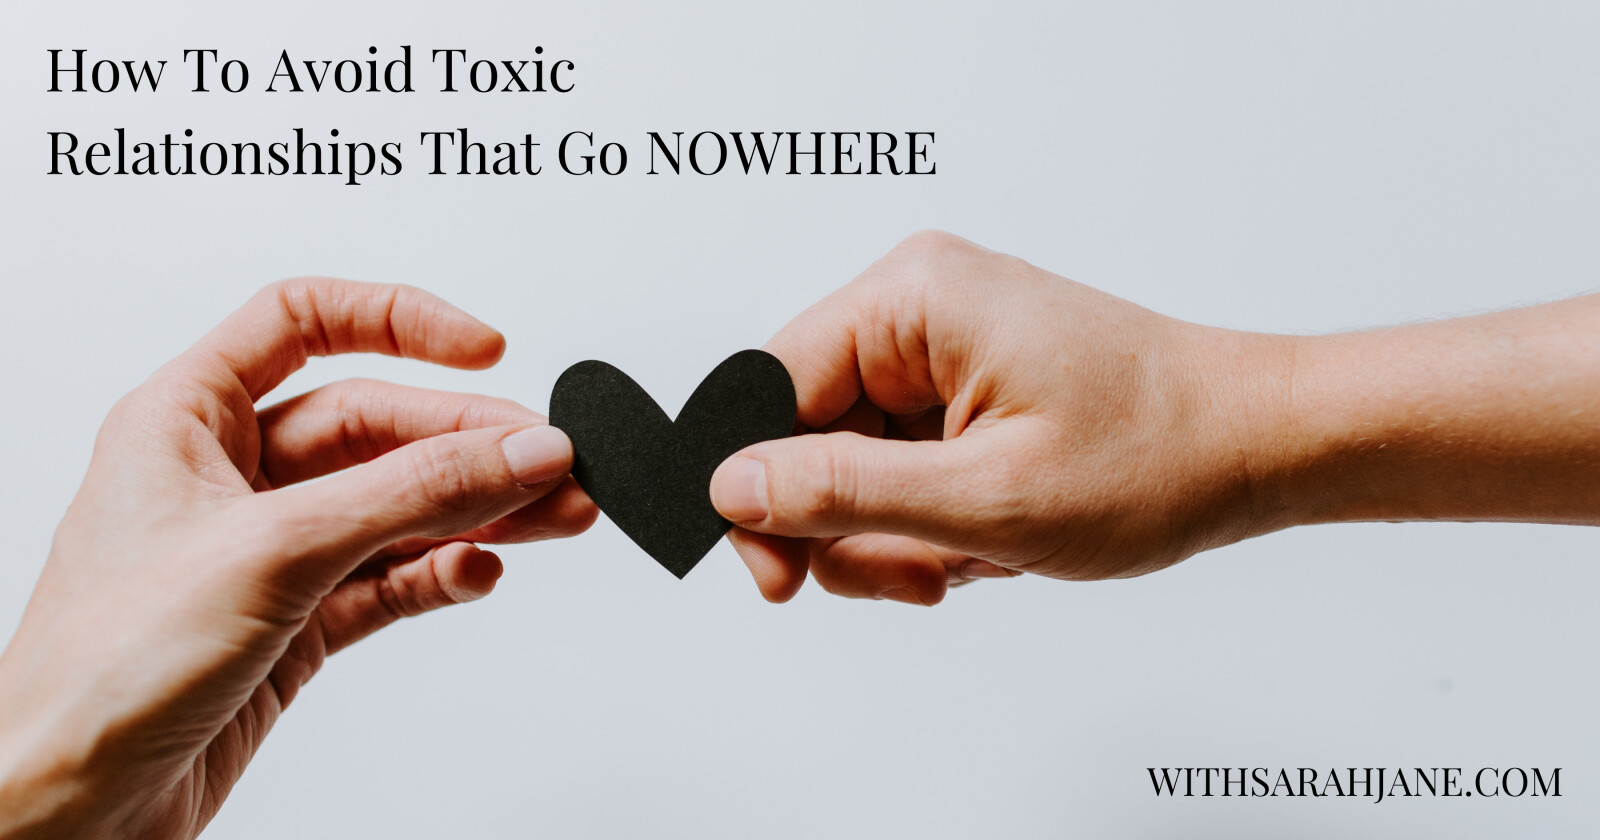 How to Avoid Toxic Relationships That Go Nowhere 